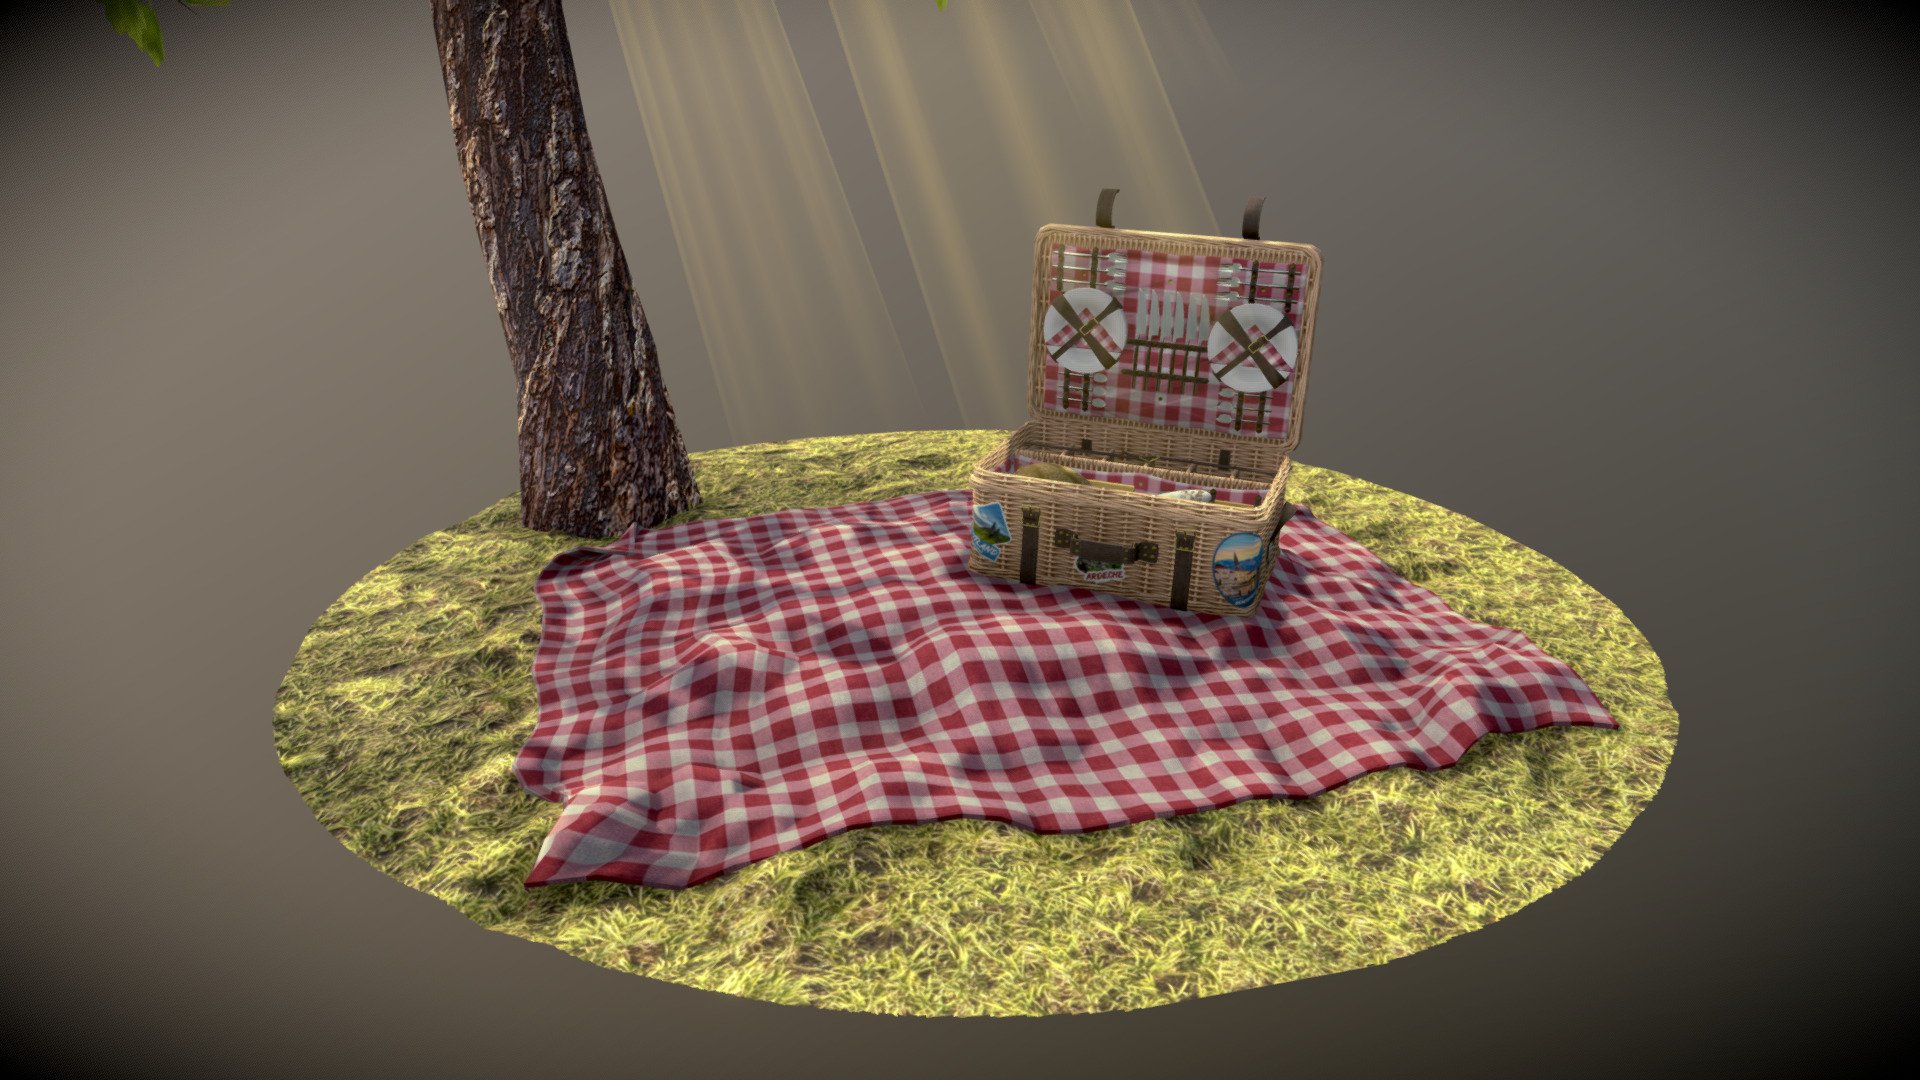 Among distinguished hikers, we tell the story of the picnic basket, a treasure chest that allows to eat into the wild while enjoying the comfort of the table! To find it, look at the trees' foot during spring time!

Made with 3Ds max, Substance Painter and Designer, 
For the Tree I used Tree It! - Picnic time ! - 3D model by kuckbert 3d model